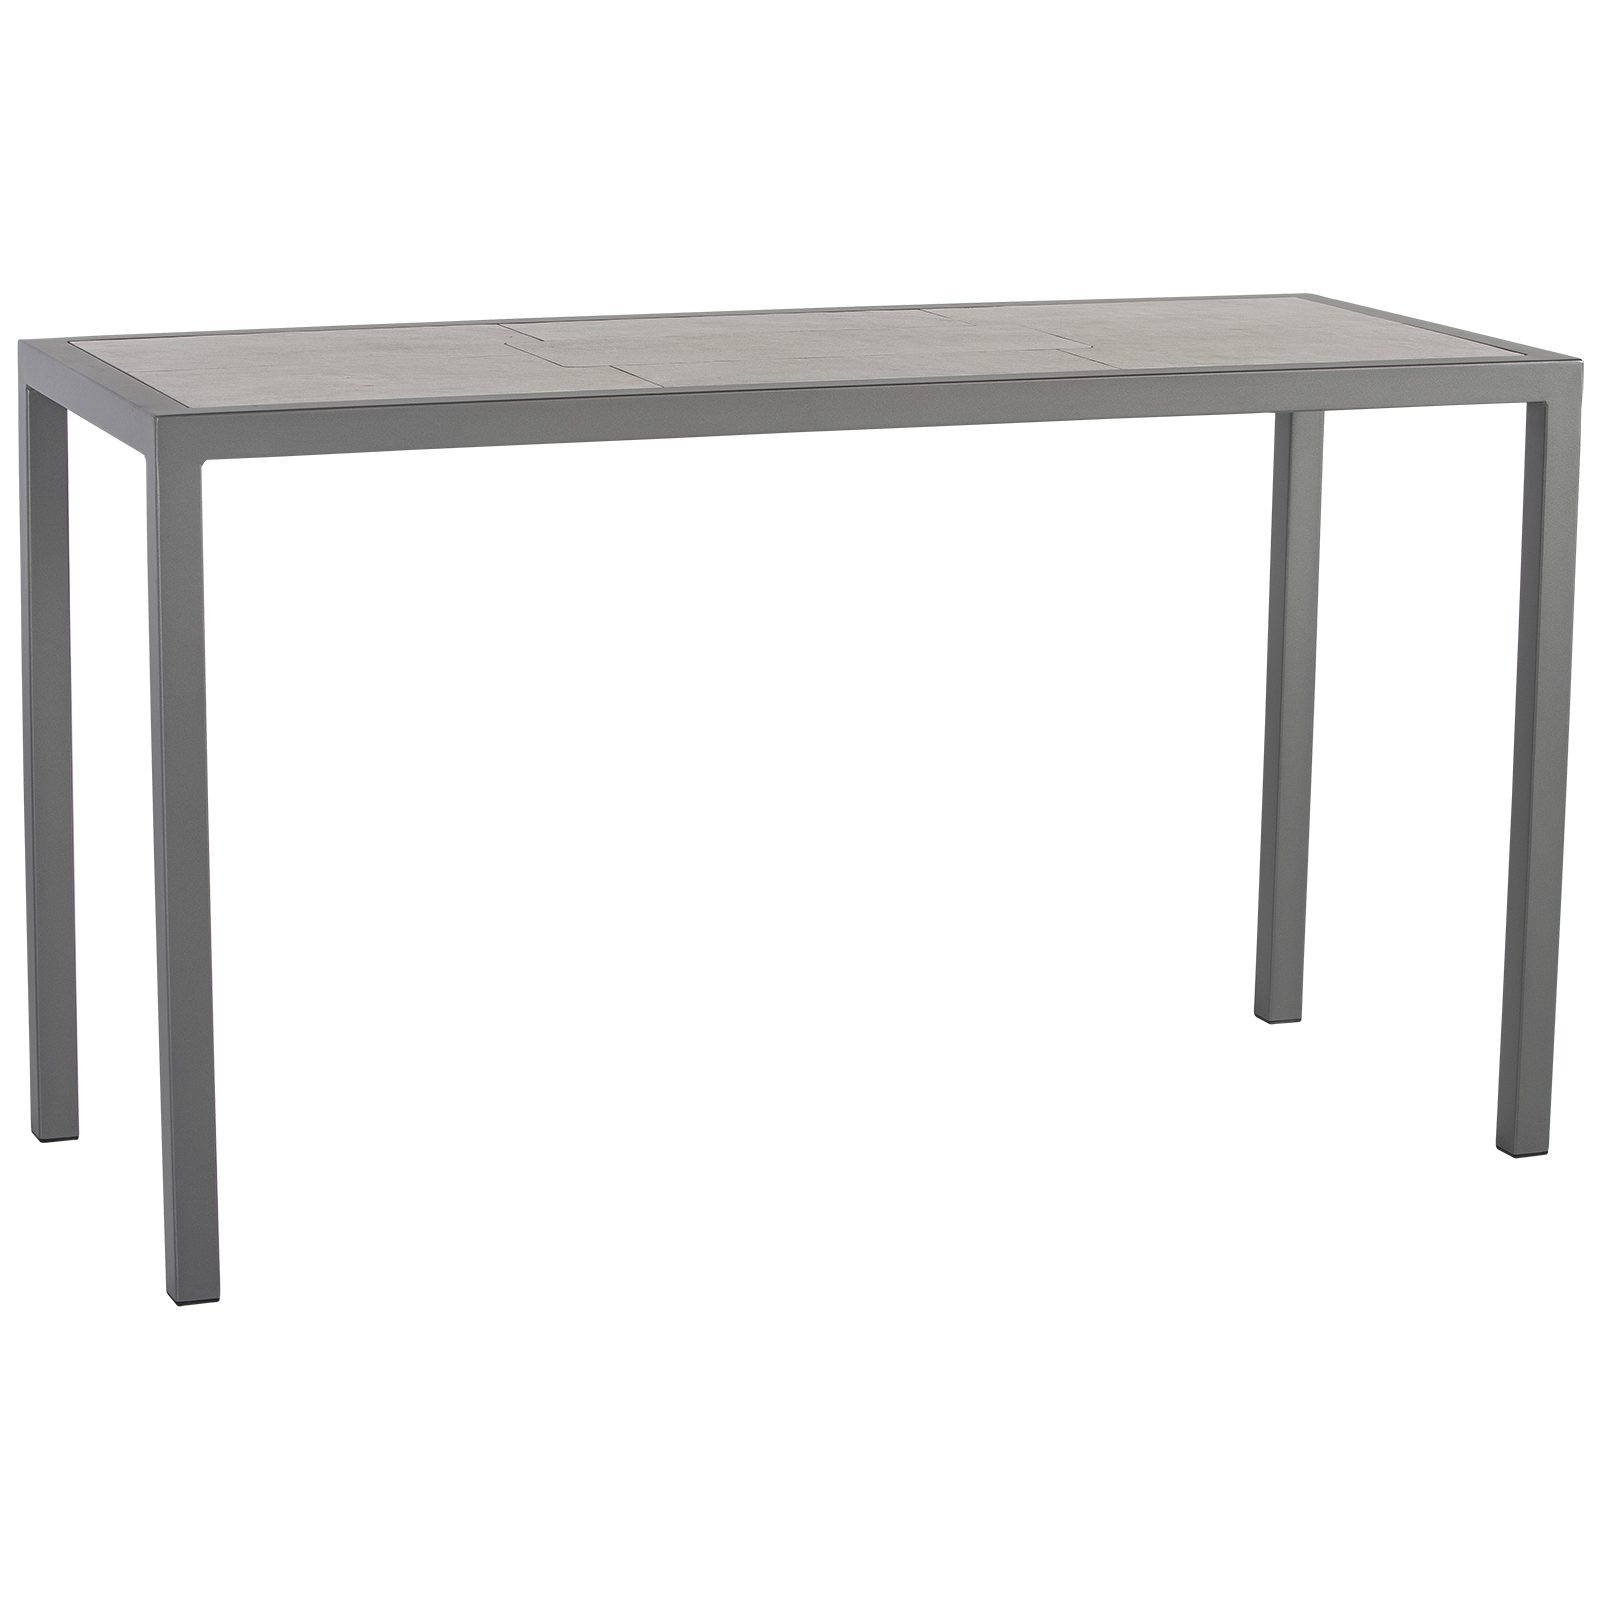 21" x 57" Dining Table - Fully Welded Tables - Quadra Iron Tables 4